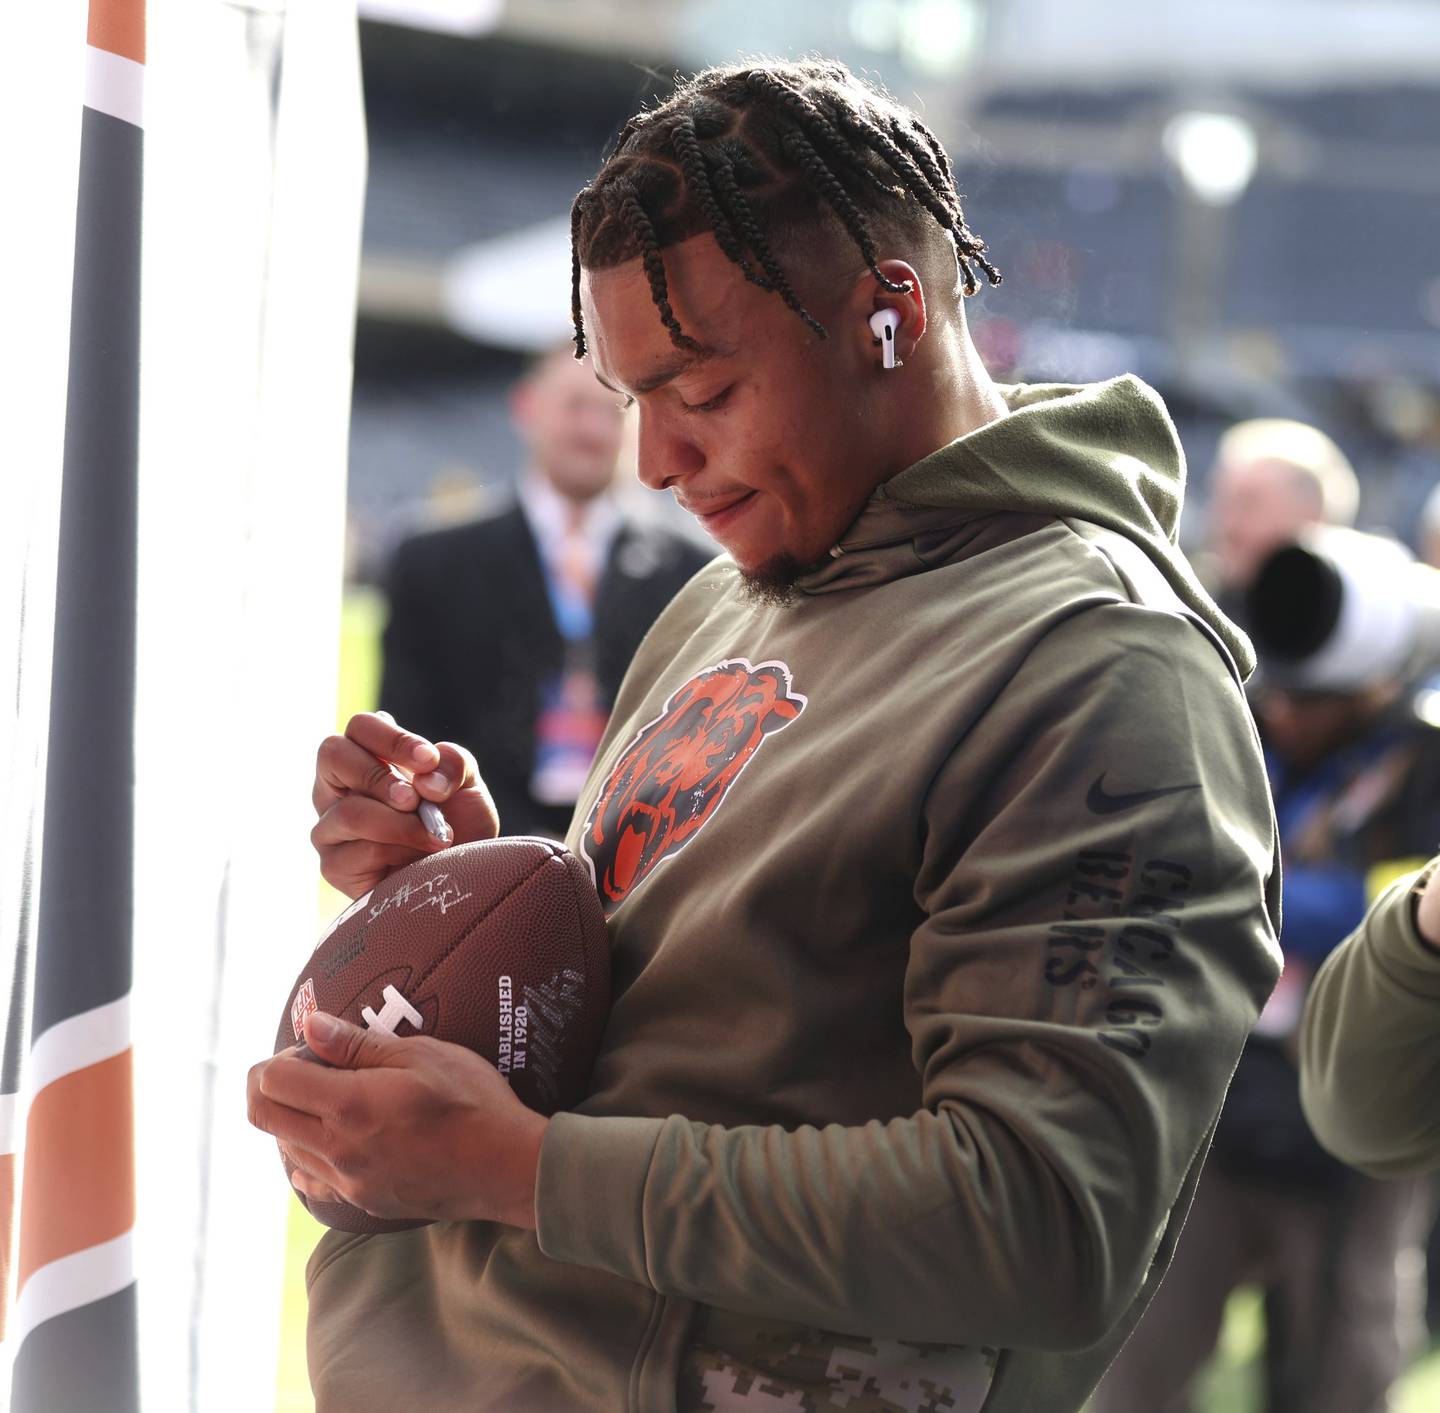 Chicago Bears quarterback Justin Fields signs autographs for fans before a game against the Detroit Lions, Nov. 13, 2022, at Soldier Field.